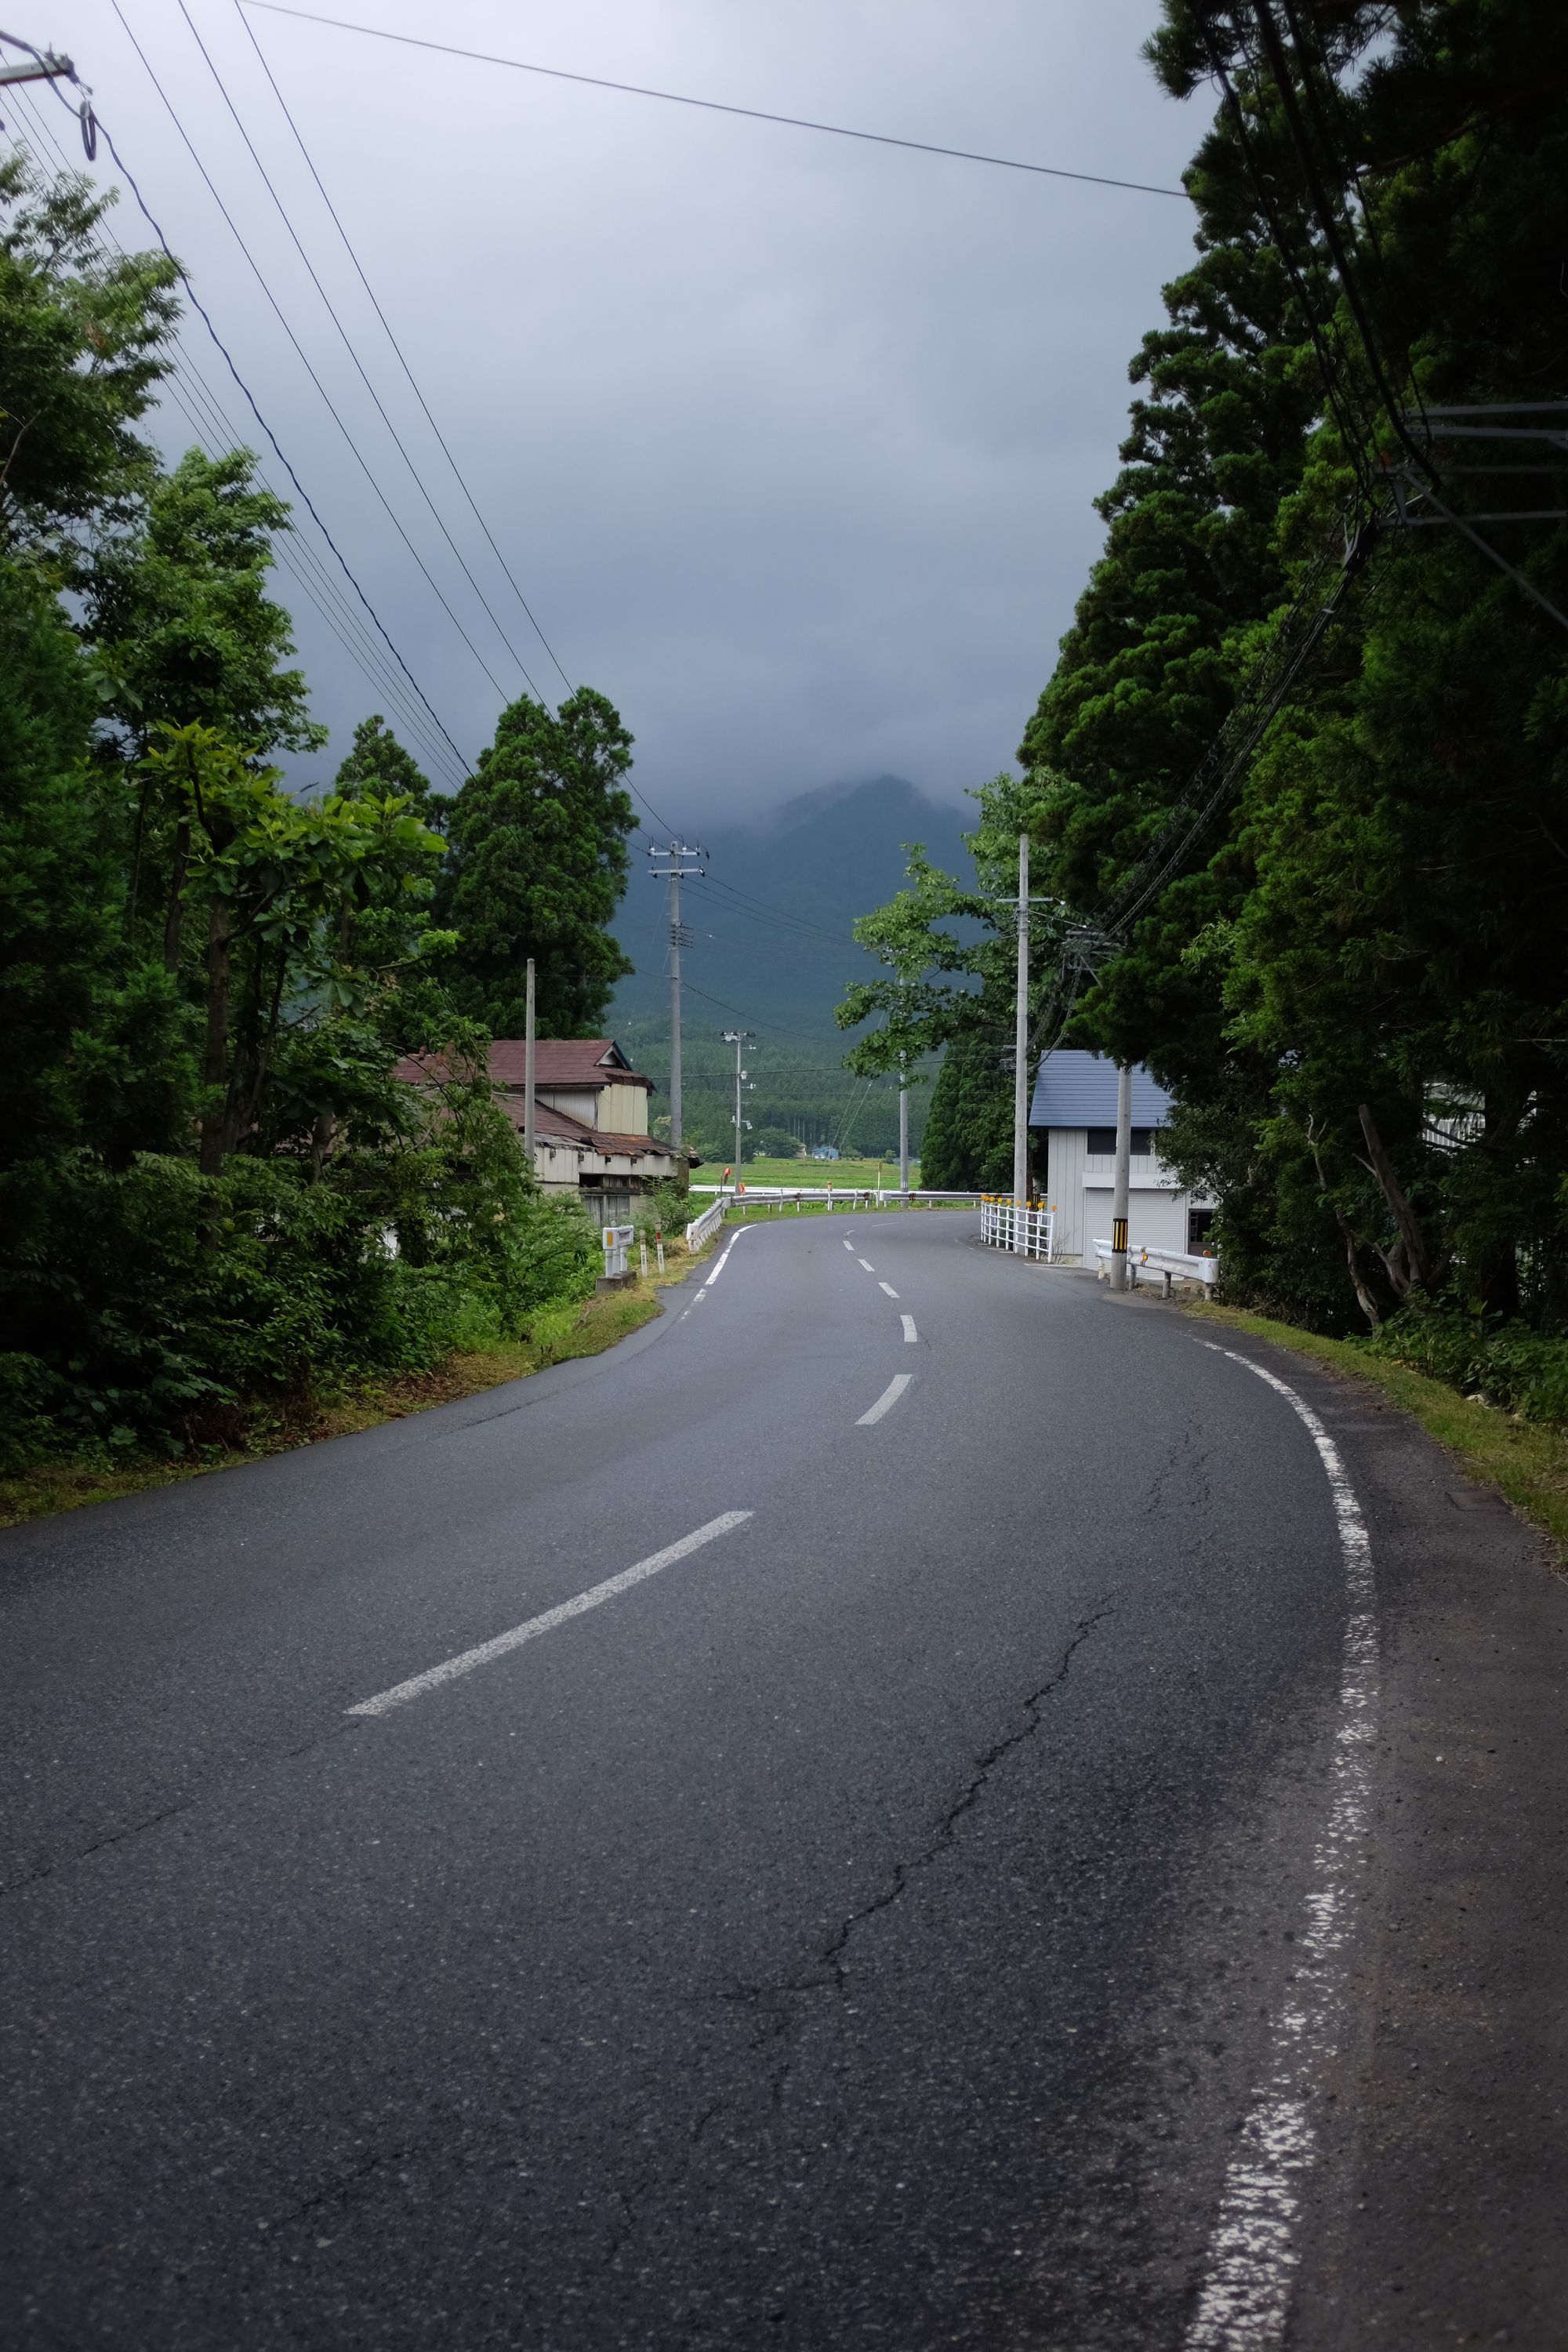 A narrow road leads towards rice fields and forested mountains.